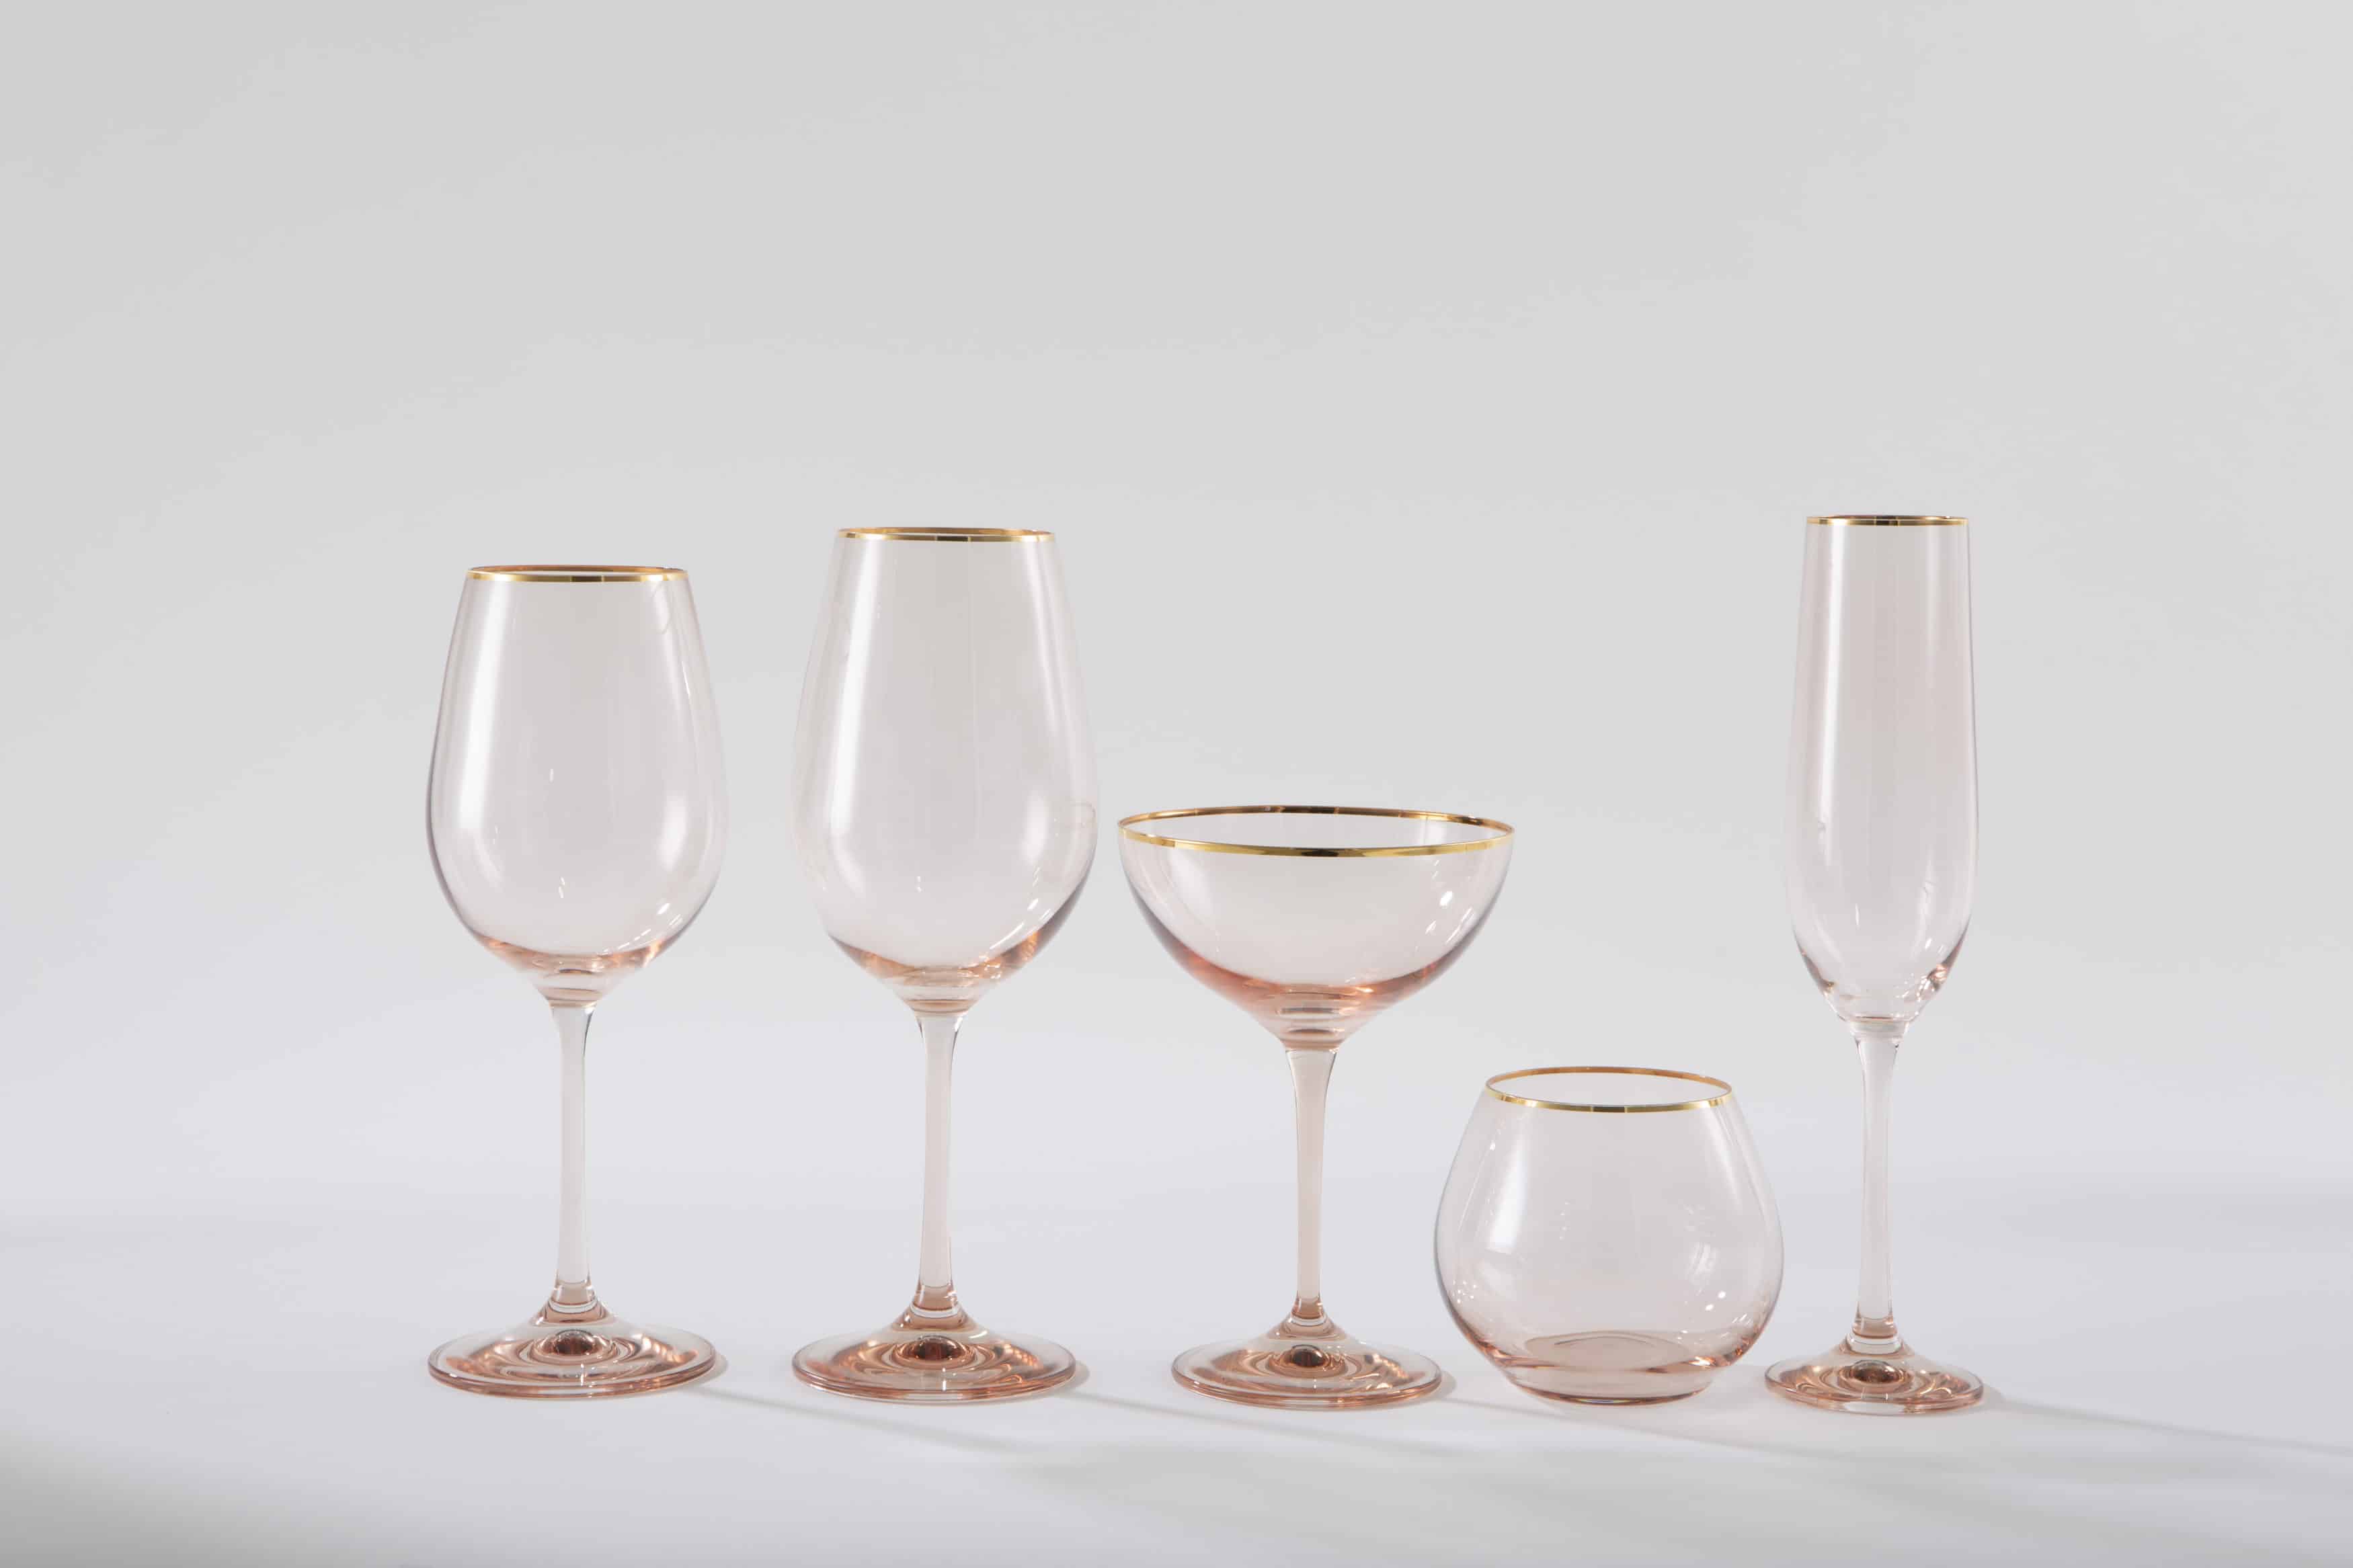  | With the red wine glass Acadia Blush we rent a wine glass with a gold rim and light pink colored glass. Whether for an elegant dinner party, a festive reception or a romantic wedding - red wine glass Acadia Blush is definitely something special for your event.You can rent other glasses of the Acadia Blush series with pink colored glass to go with the wine glass. The complete Acadia Blush series includes water cups, white wine glasses, red wine glasses, champagne glasses and champagne glasse... | 